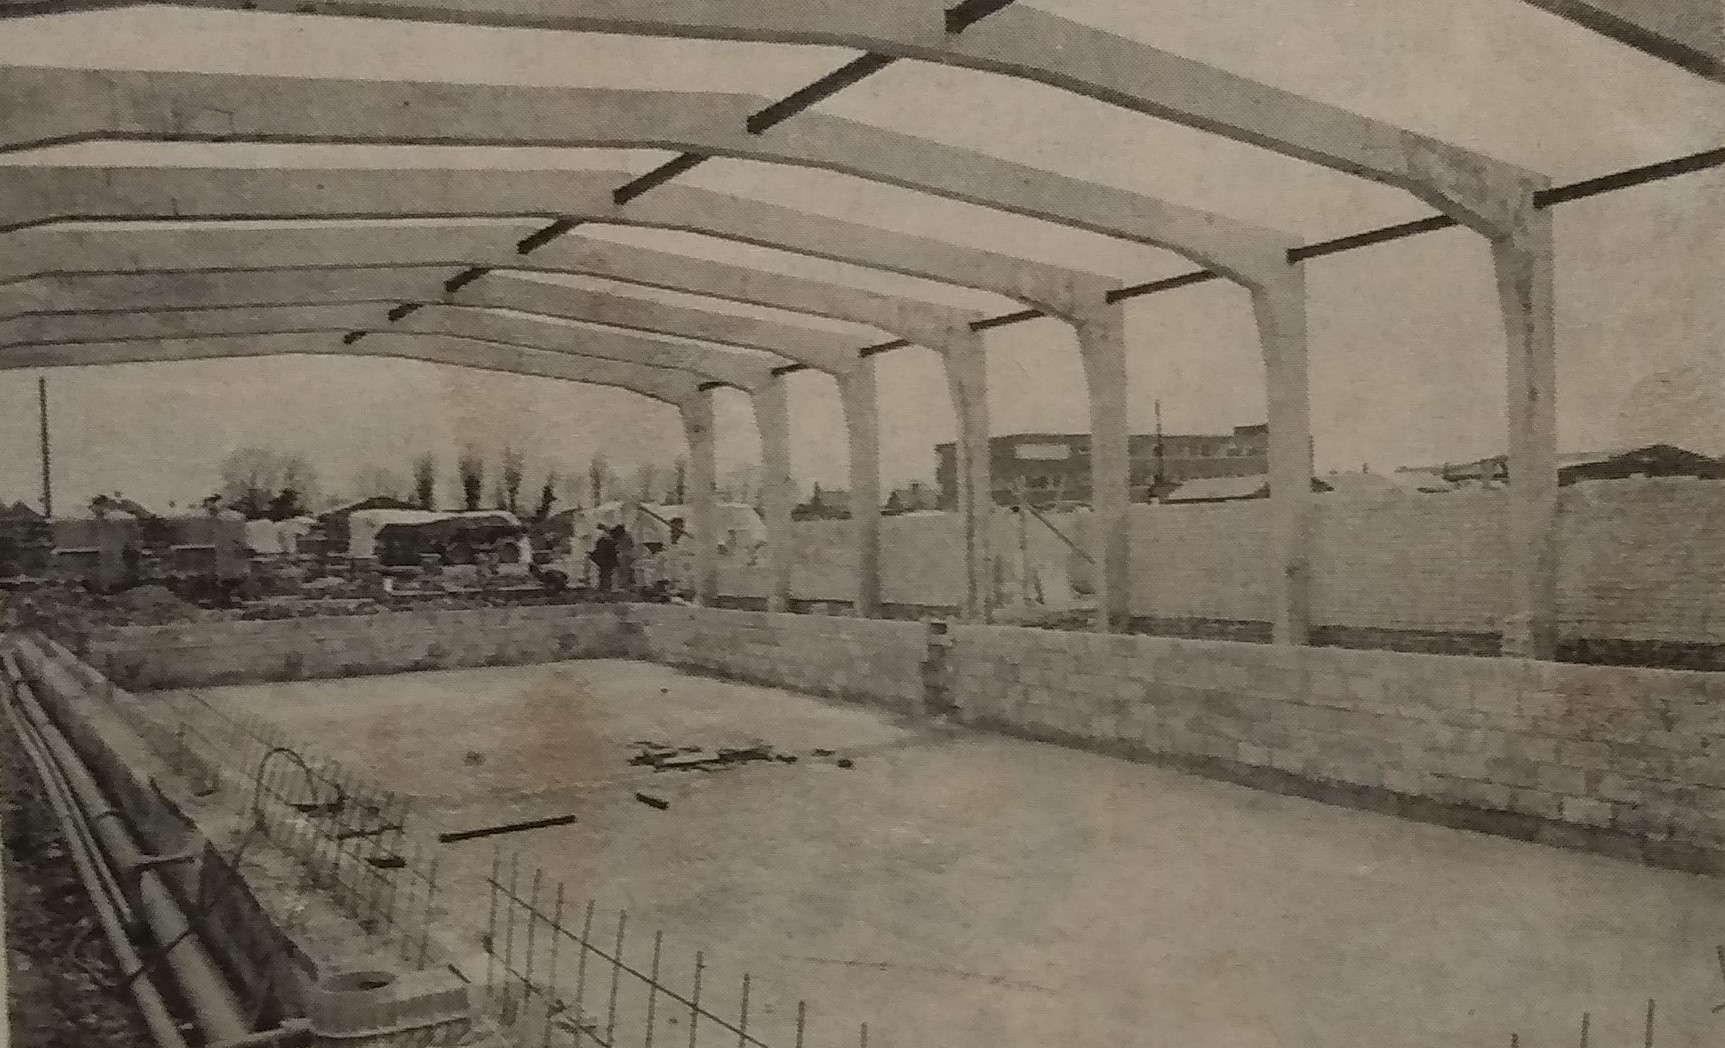 March 1977 and the new £244,000 pool is beginning to take shape